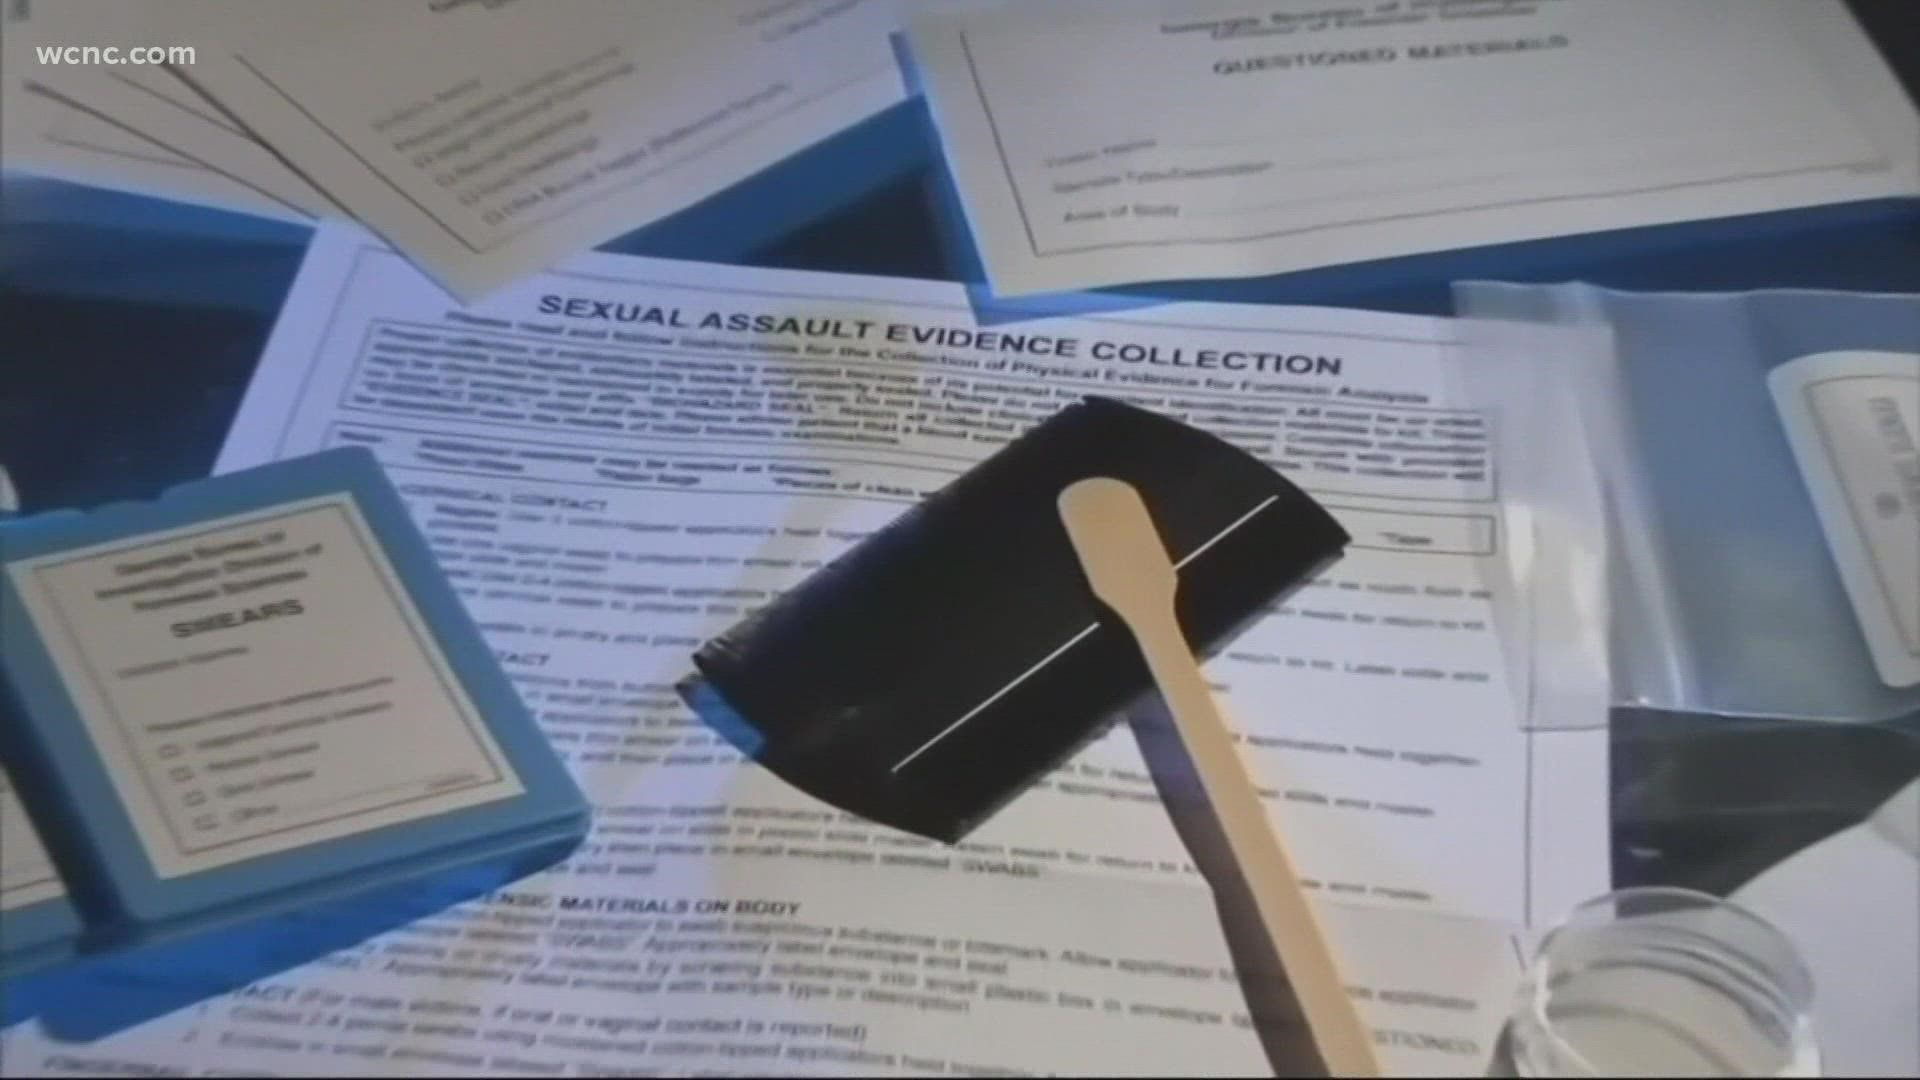 The arrest comes as the state continues to work through a backlog of untested rape kits.